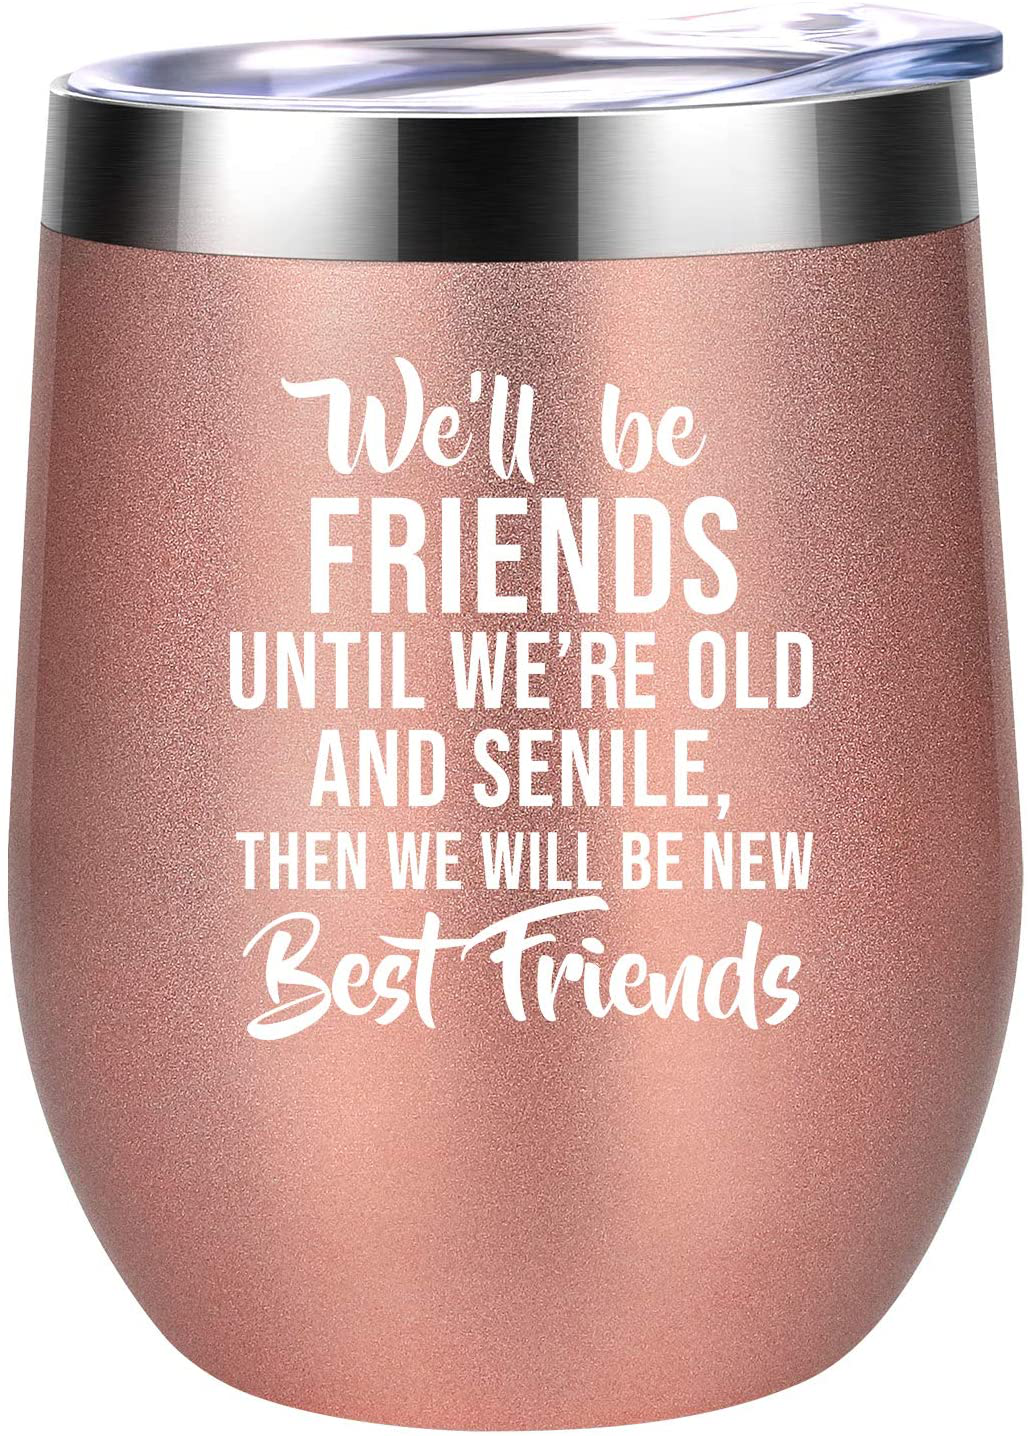 Friendship Gifts for Women - Christmas, Birthday Gifts for Best Friend - Friend Gifts for Women, BFF Gifts - Unusual Gifts for Friends Female, Unbiological Soul Sister, Bestie - Coolife Wine Tumbler